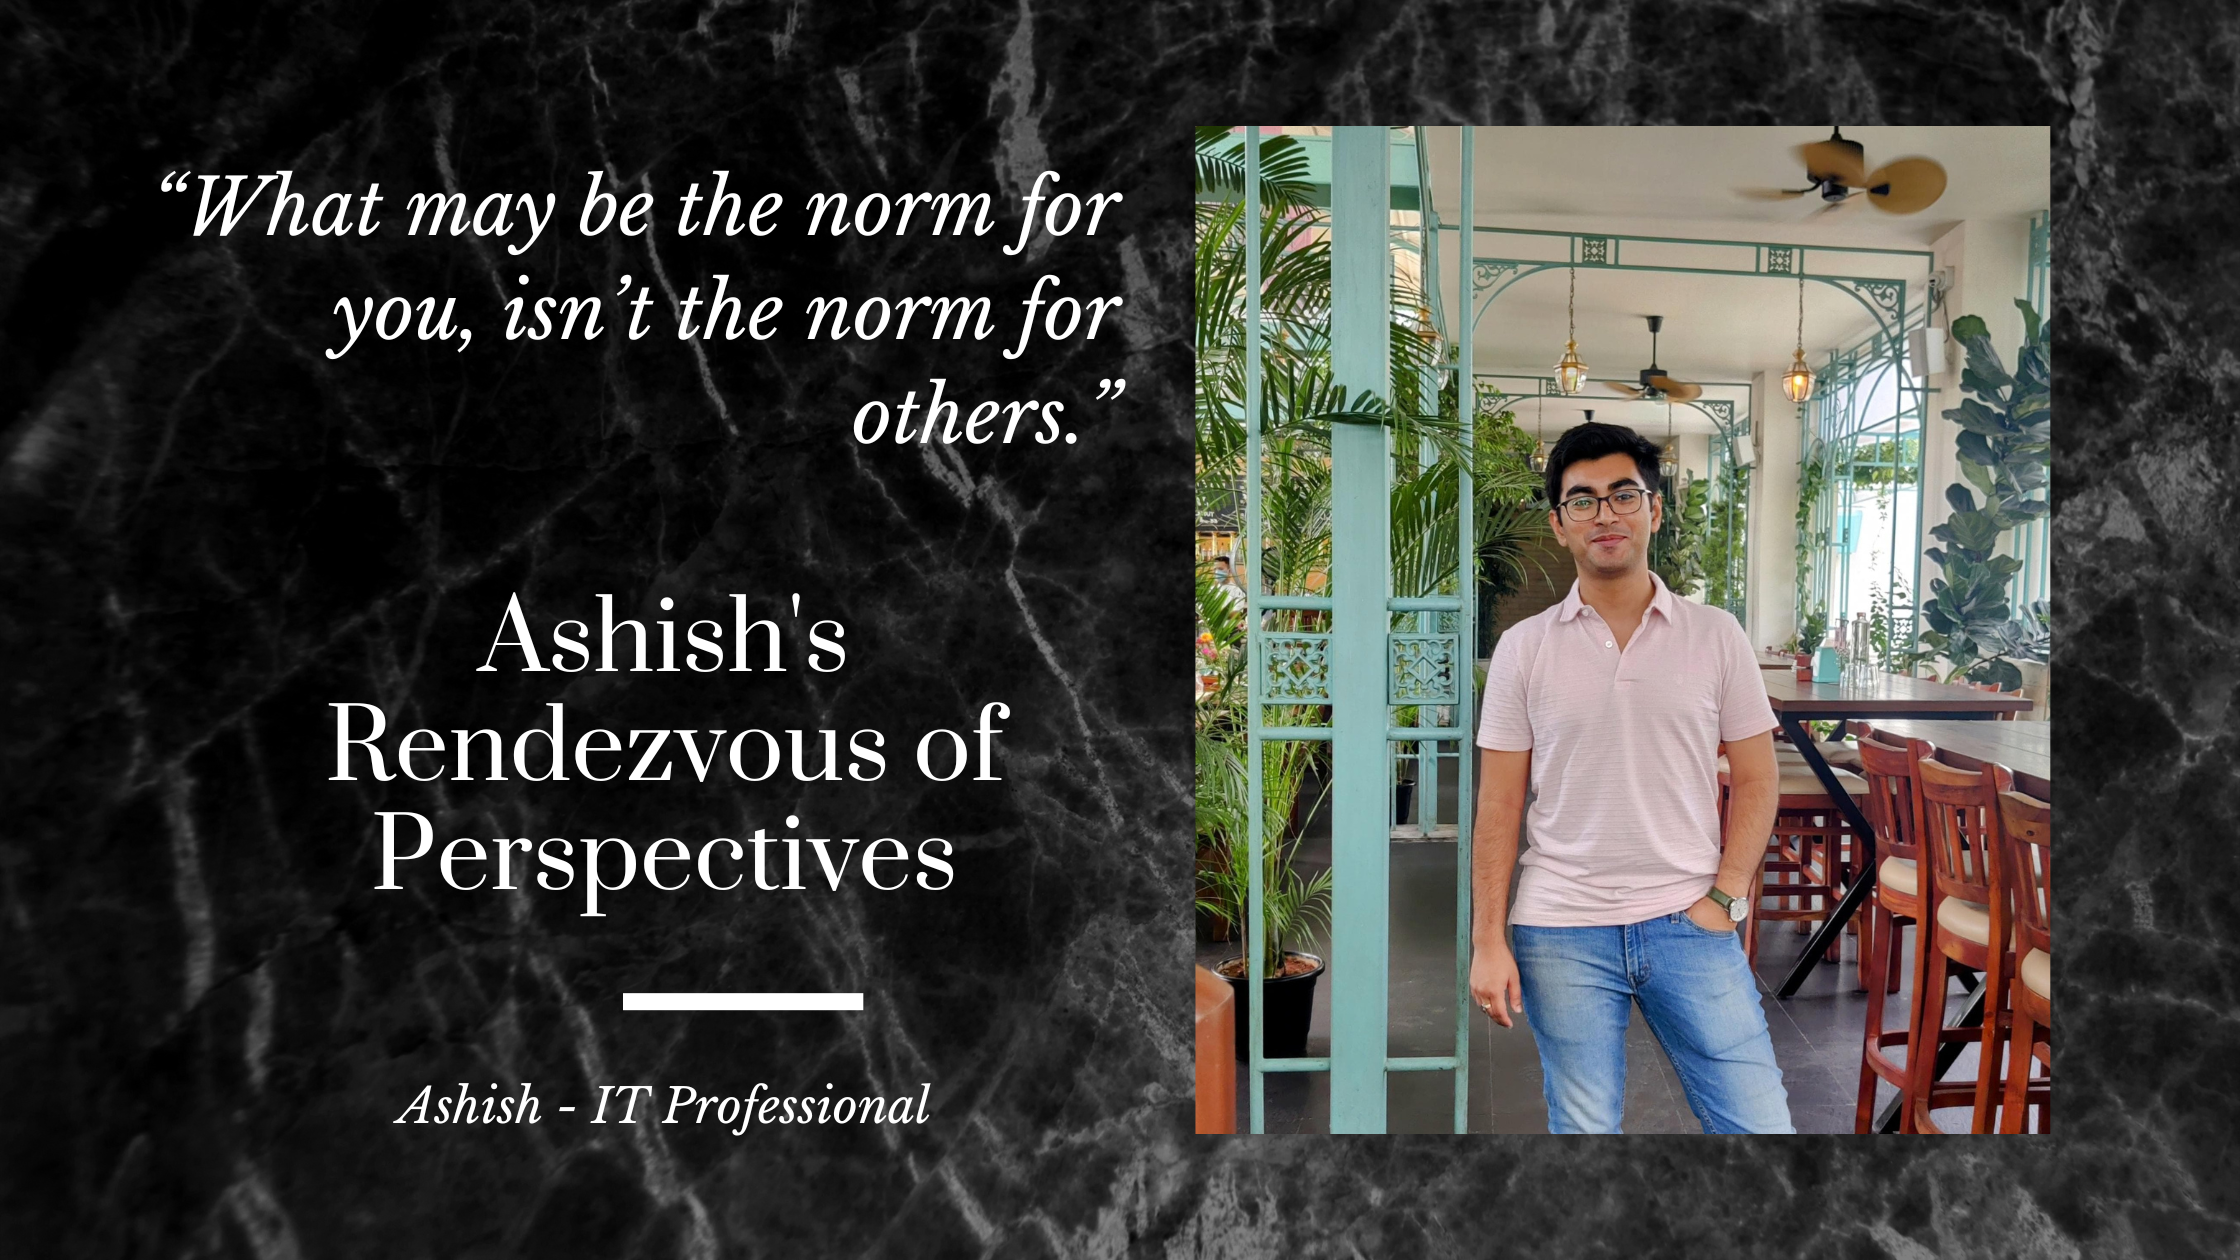 Ashish’s Rendezvous of Perspectives